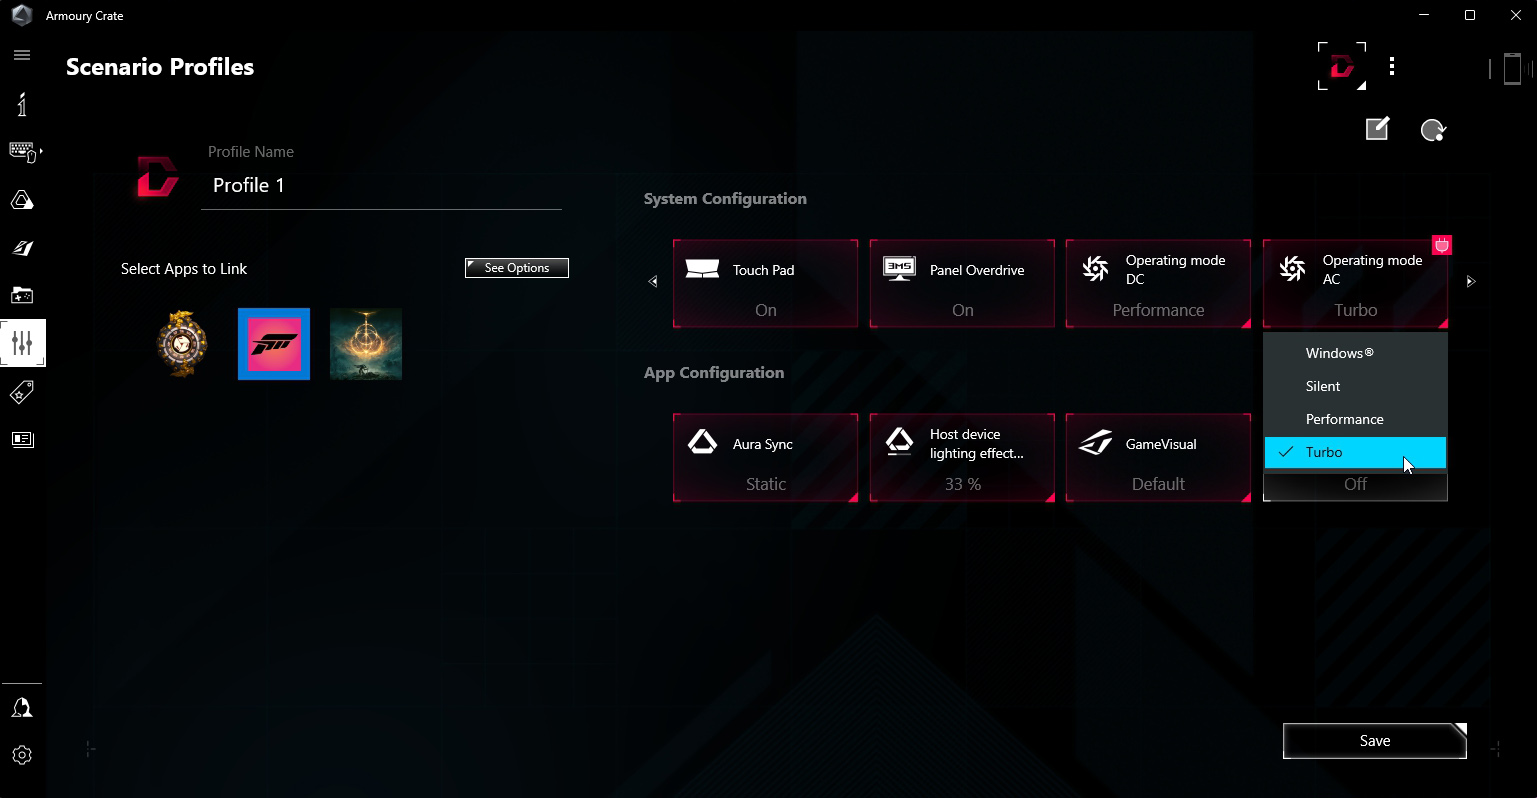 A screenshot of the Armoury Crate software with customized Scenario Profiles for gaming.